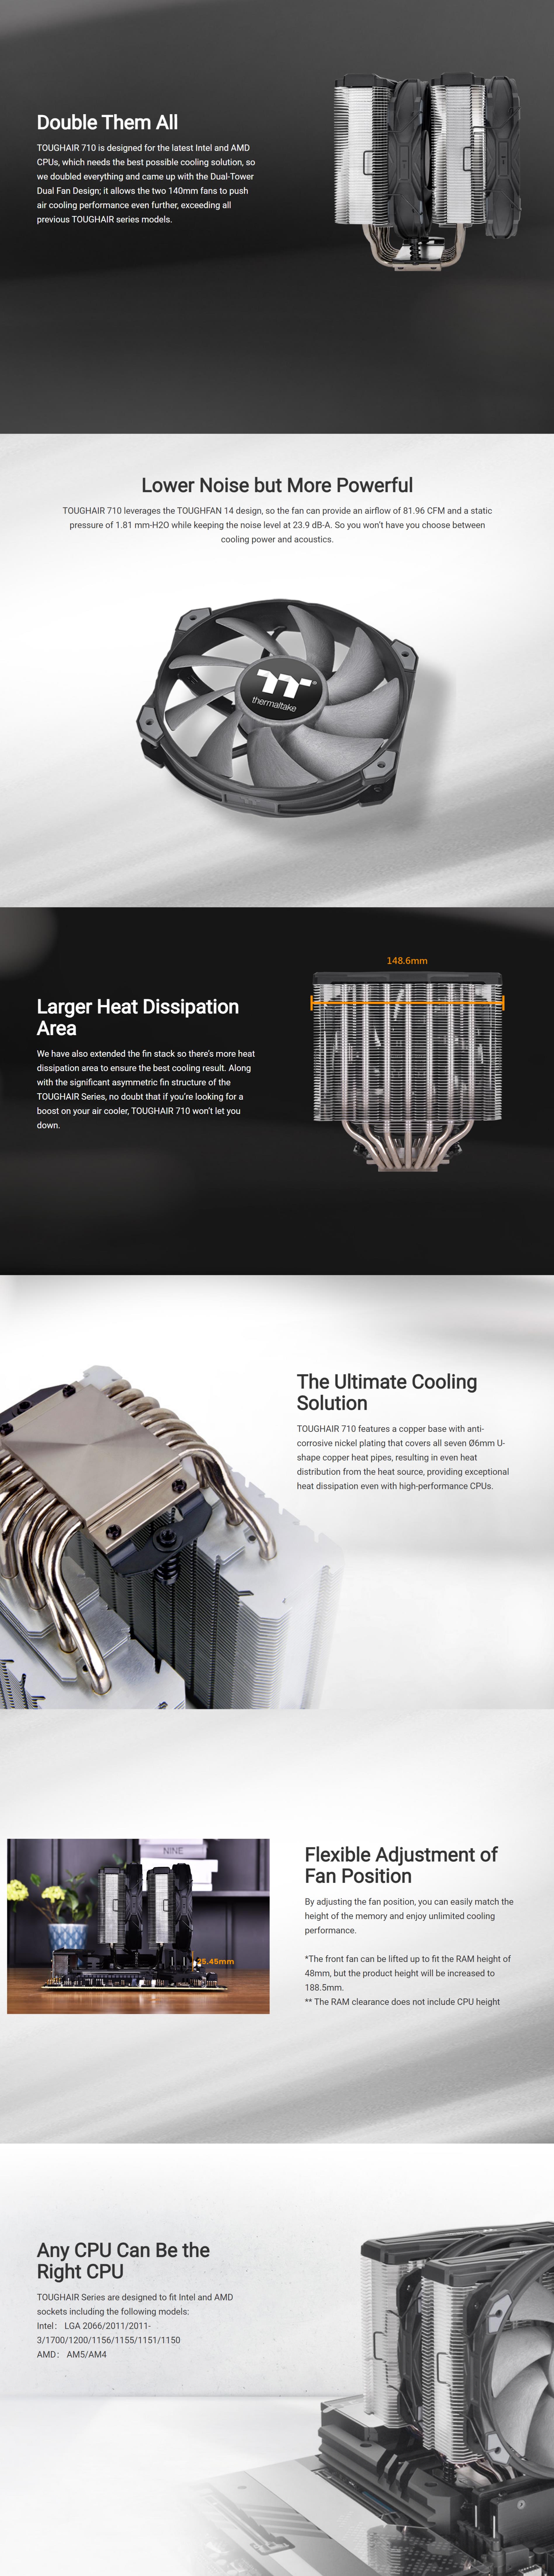 A large marketing image providing additional information about the product Thermaltake Toughair 710 Dual Tower CPU Cooler - Additional alt info not provided